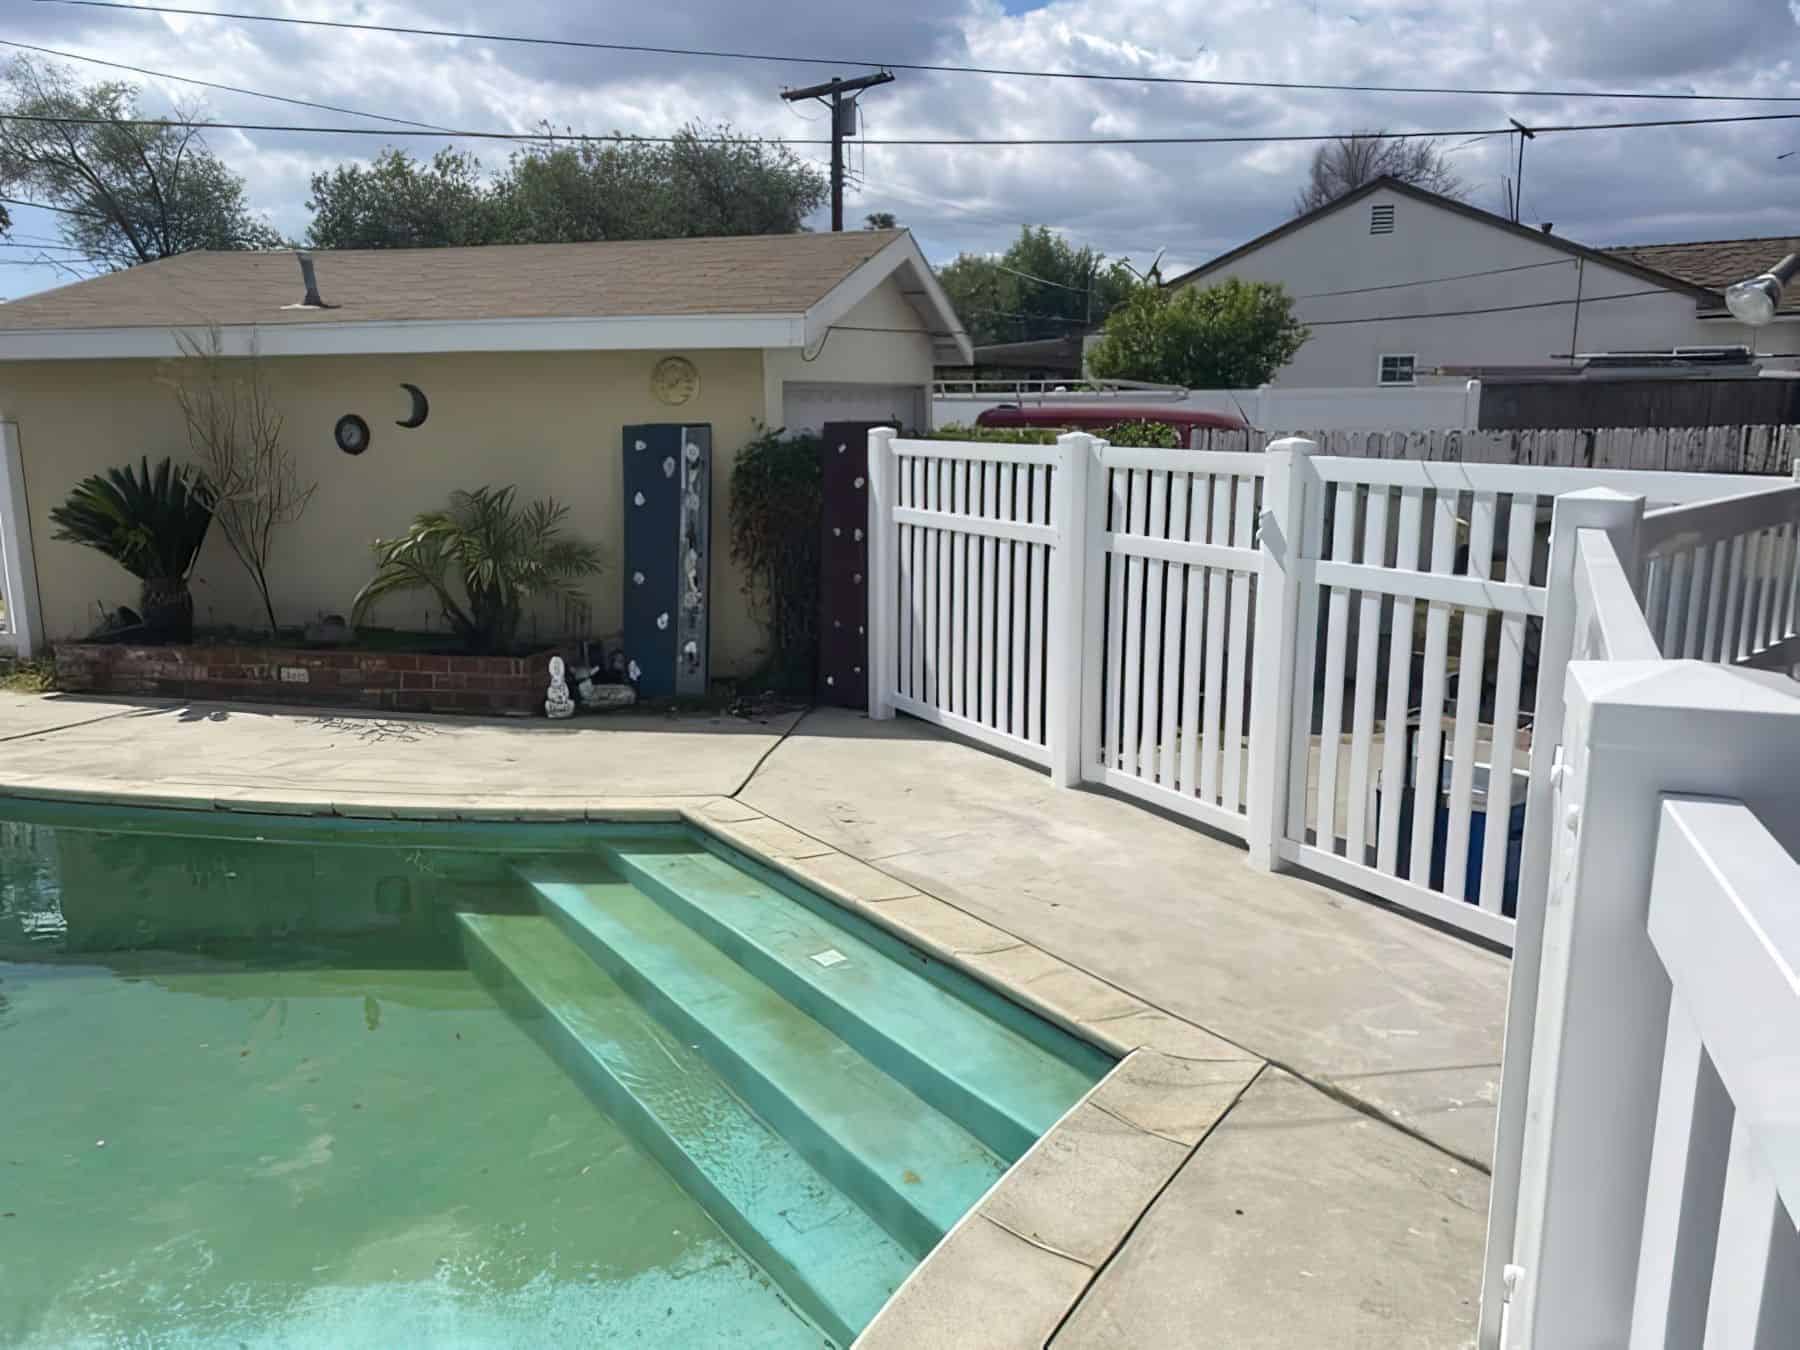 Vinyl pool fence behind small garden patch with palm trees and small flowers and uniquely shaped oval pool with stairs.